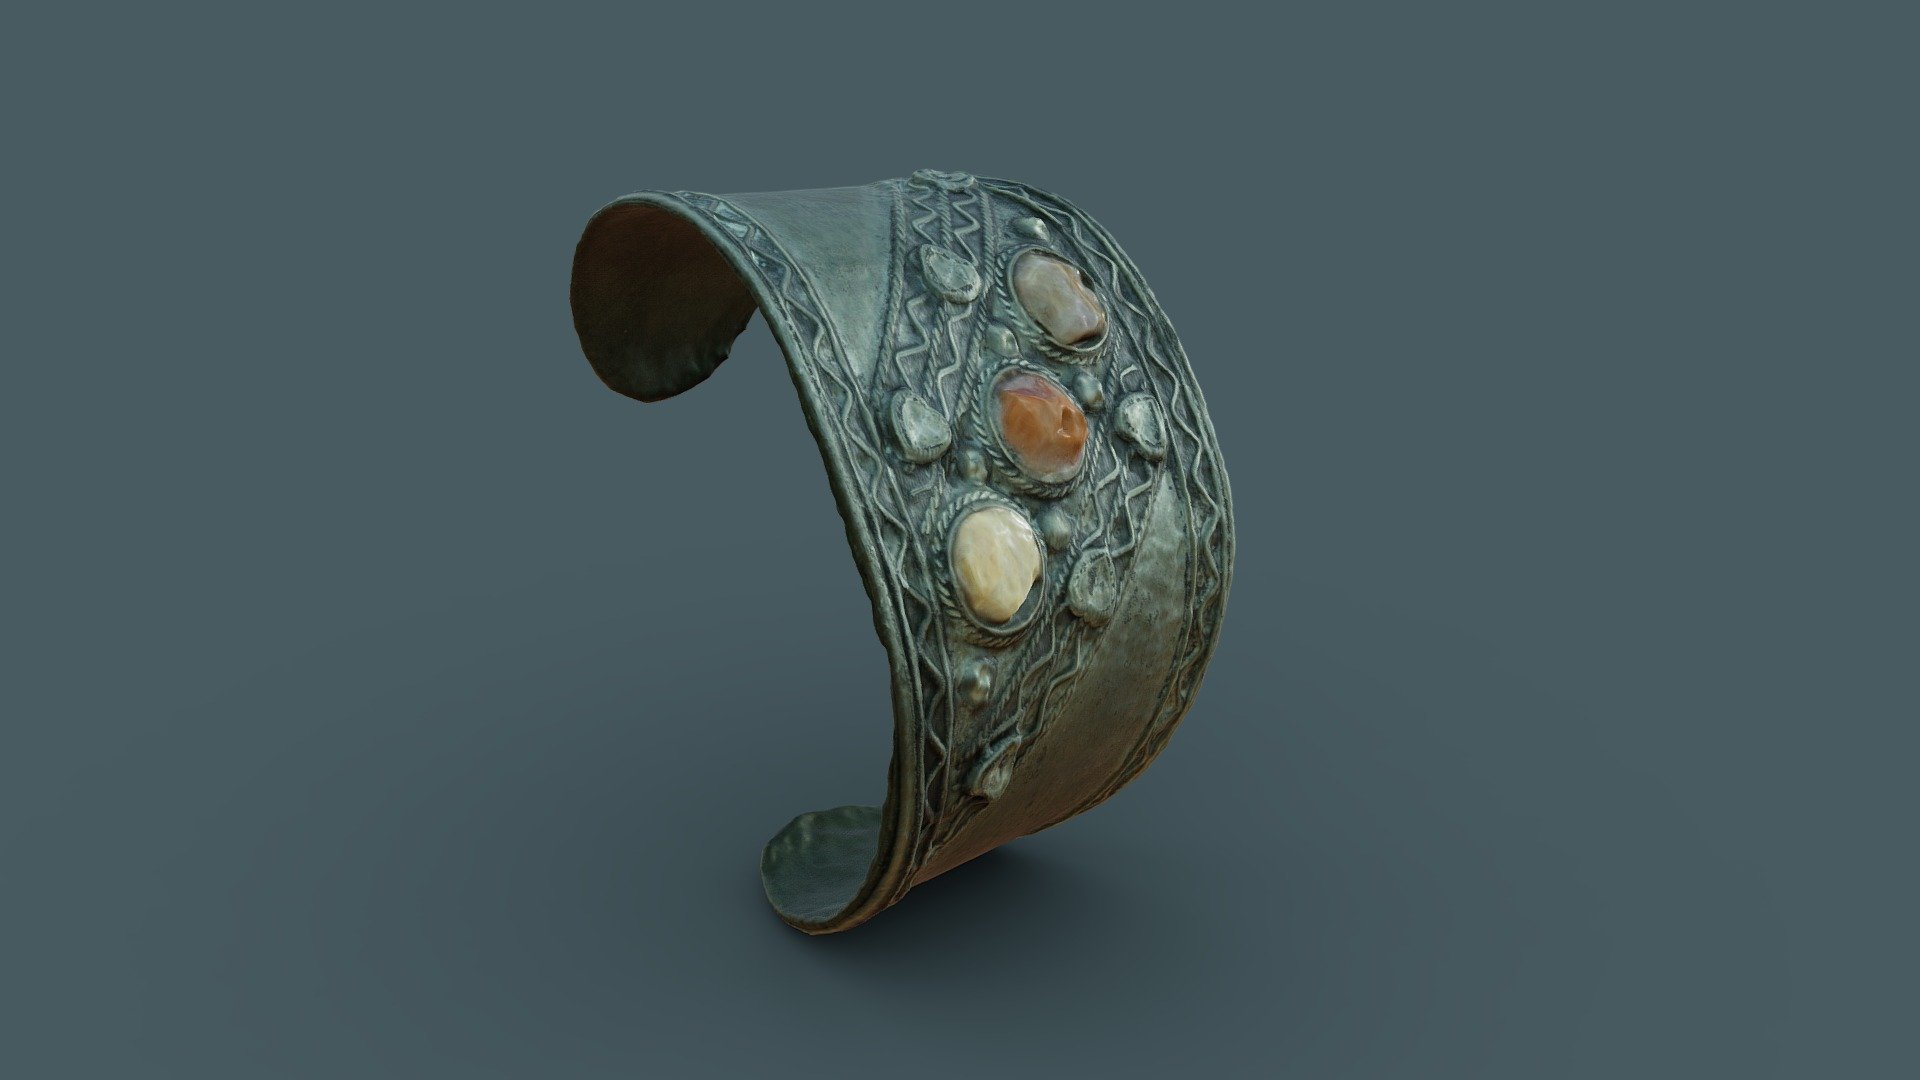 Thanks @amandasonnenschein for letting me borrow your bracelet! 

Scanned with Reality Capture 
PBR materials made in Substance 
Cleanup in blender 

Day 28

twitter.com/austinbeaulier
instagram.com/austinbeaulier - Inset stone bangle bracelet - Buy Royalty Free 3D model by Austin Beaulier (@Austin.Beaulier) 3d model